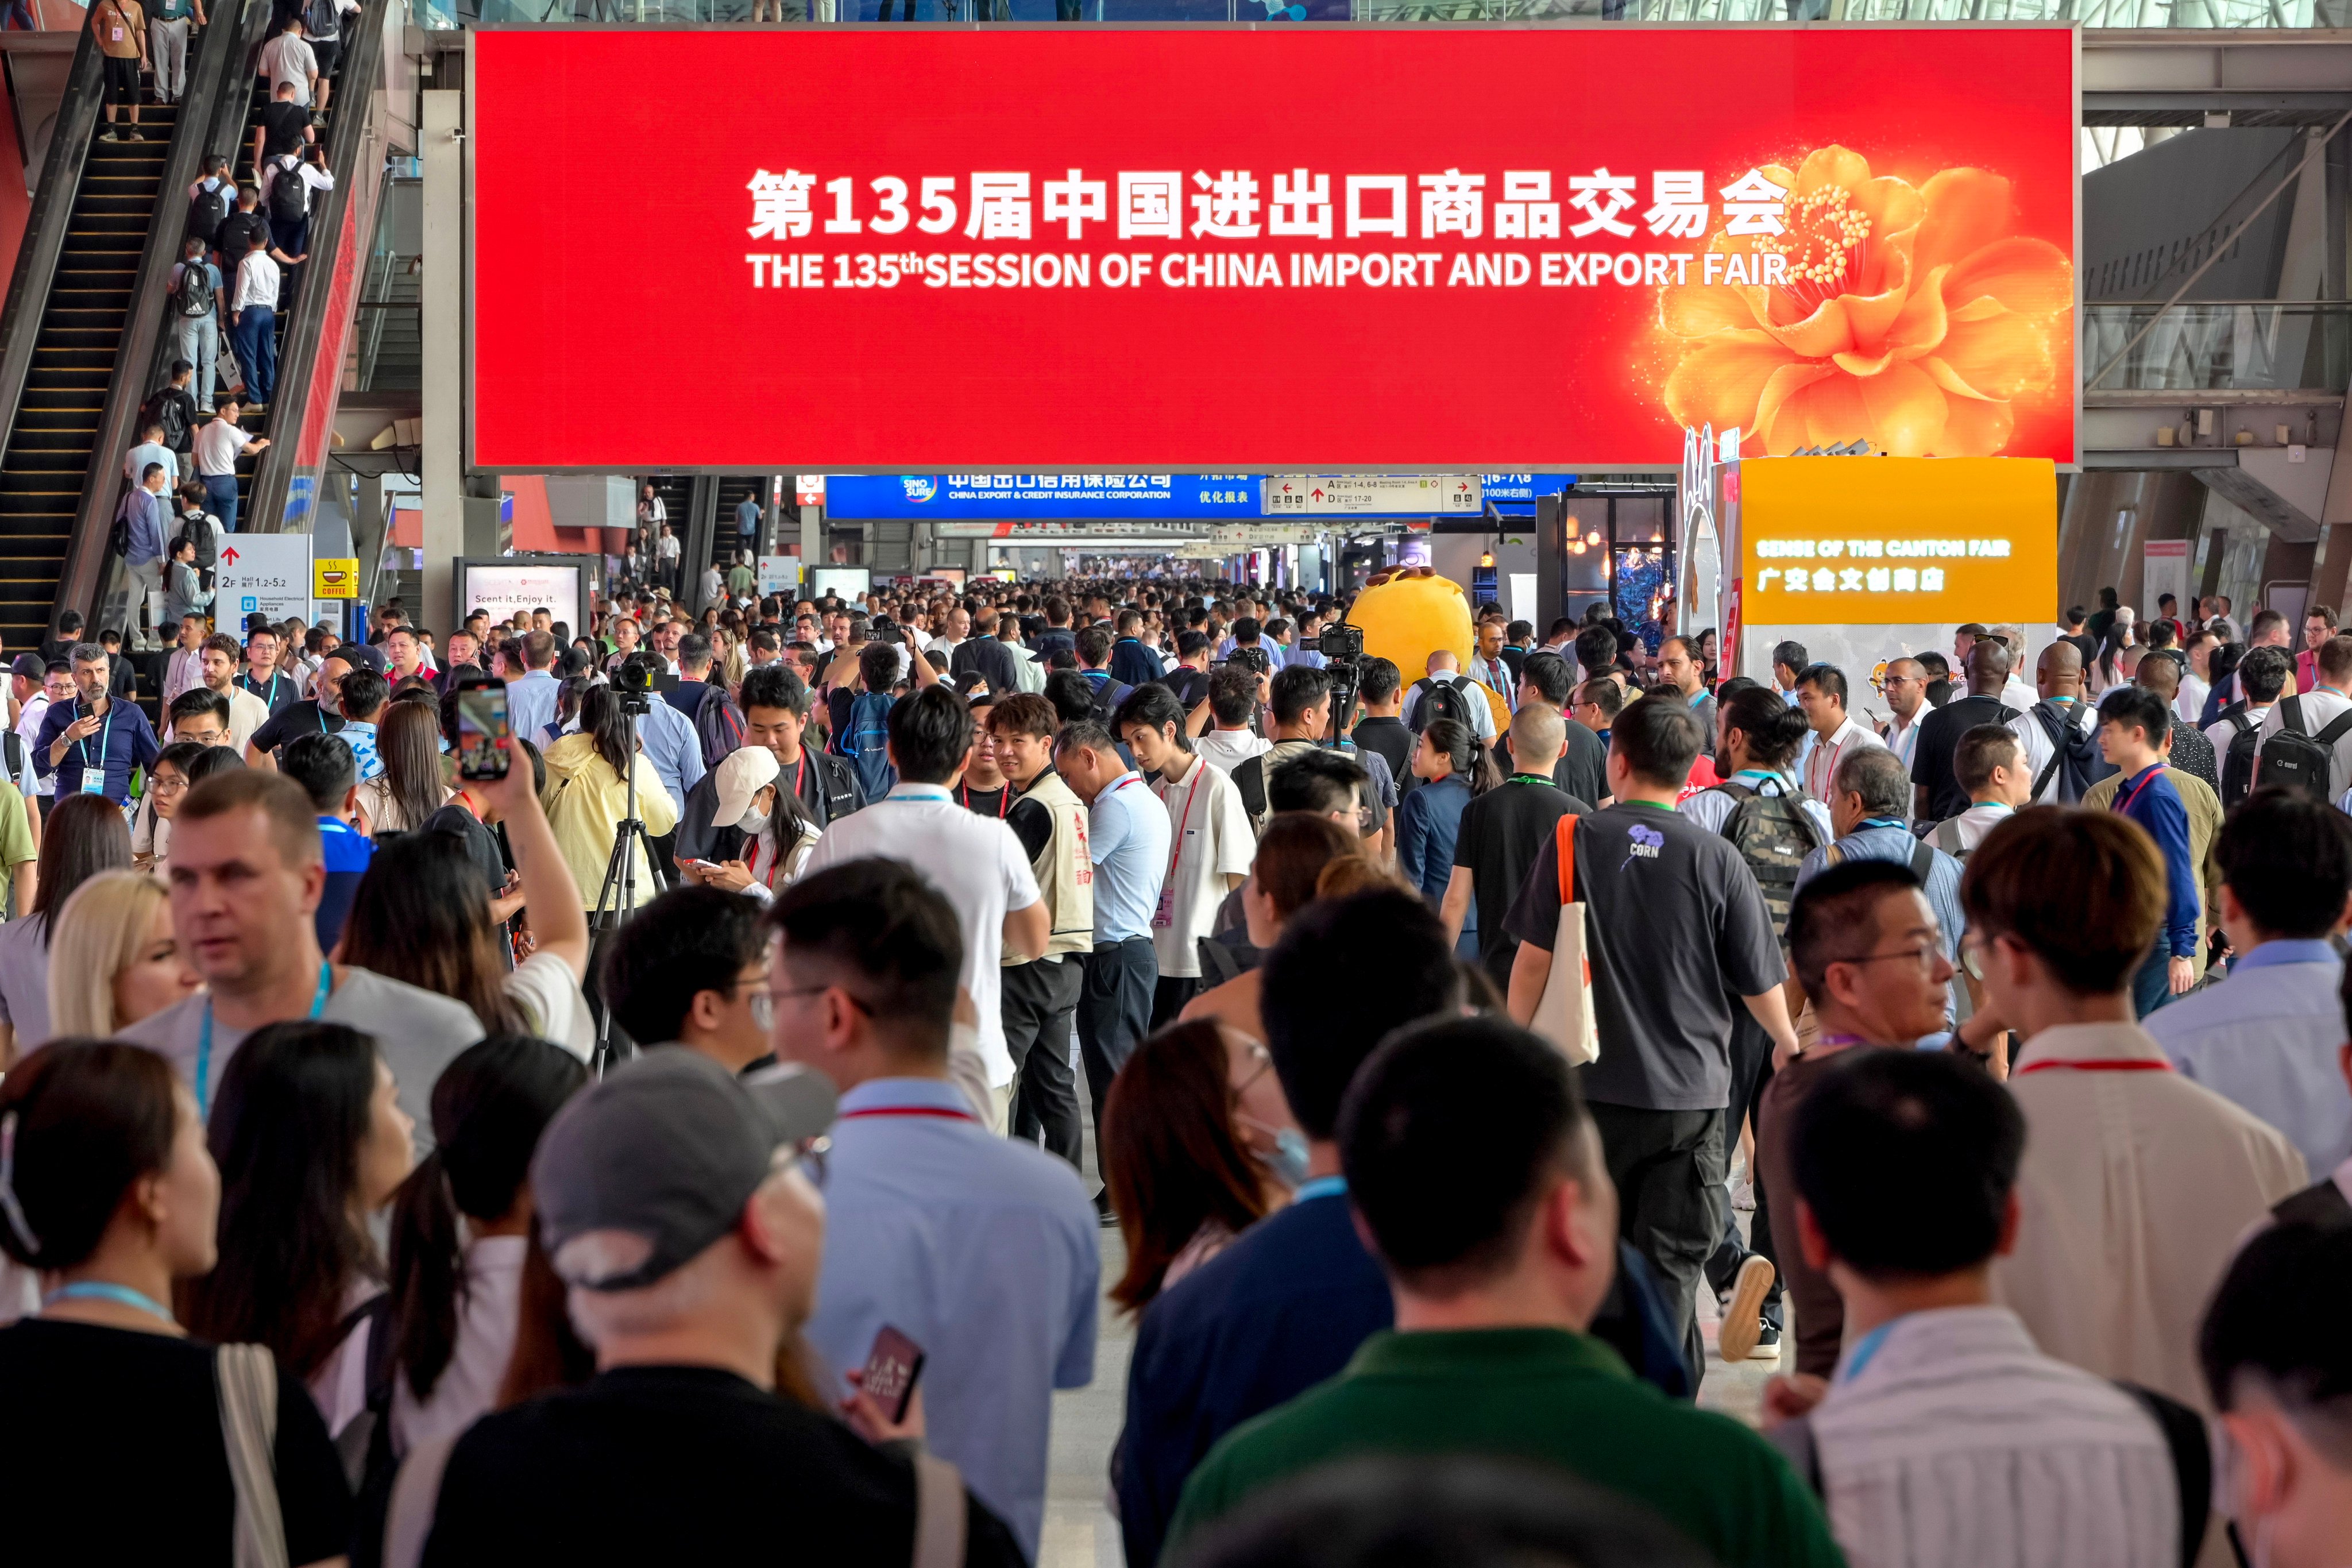 Buyers and exhibitors at the 135th China Import and Export Fair, also known as the Canton Fair, on April 15 in Guangzhou. Photo: China News Service via Getty Images